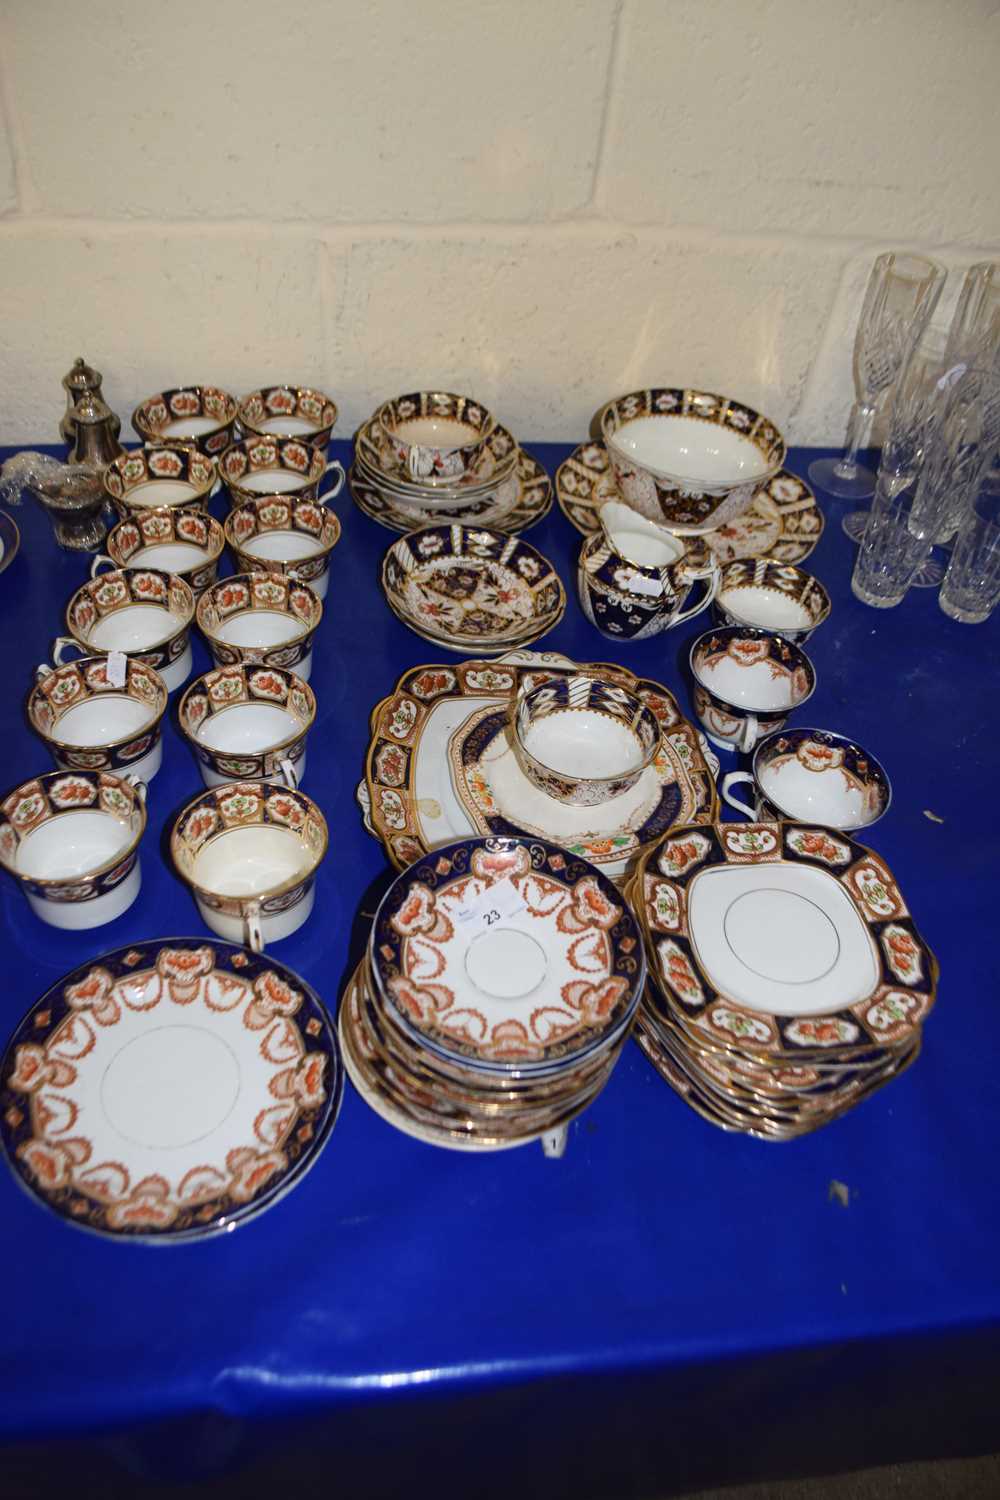 Quantity of gilt decorated tea wares, slightly differing designs